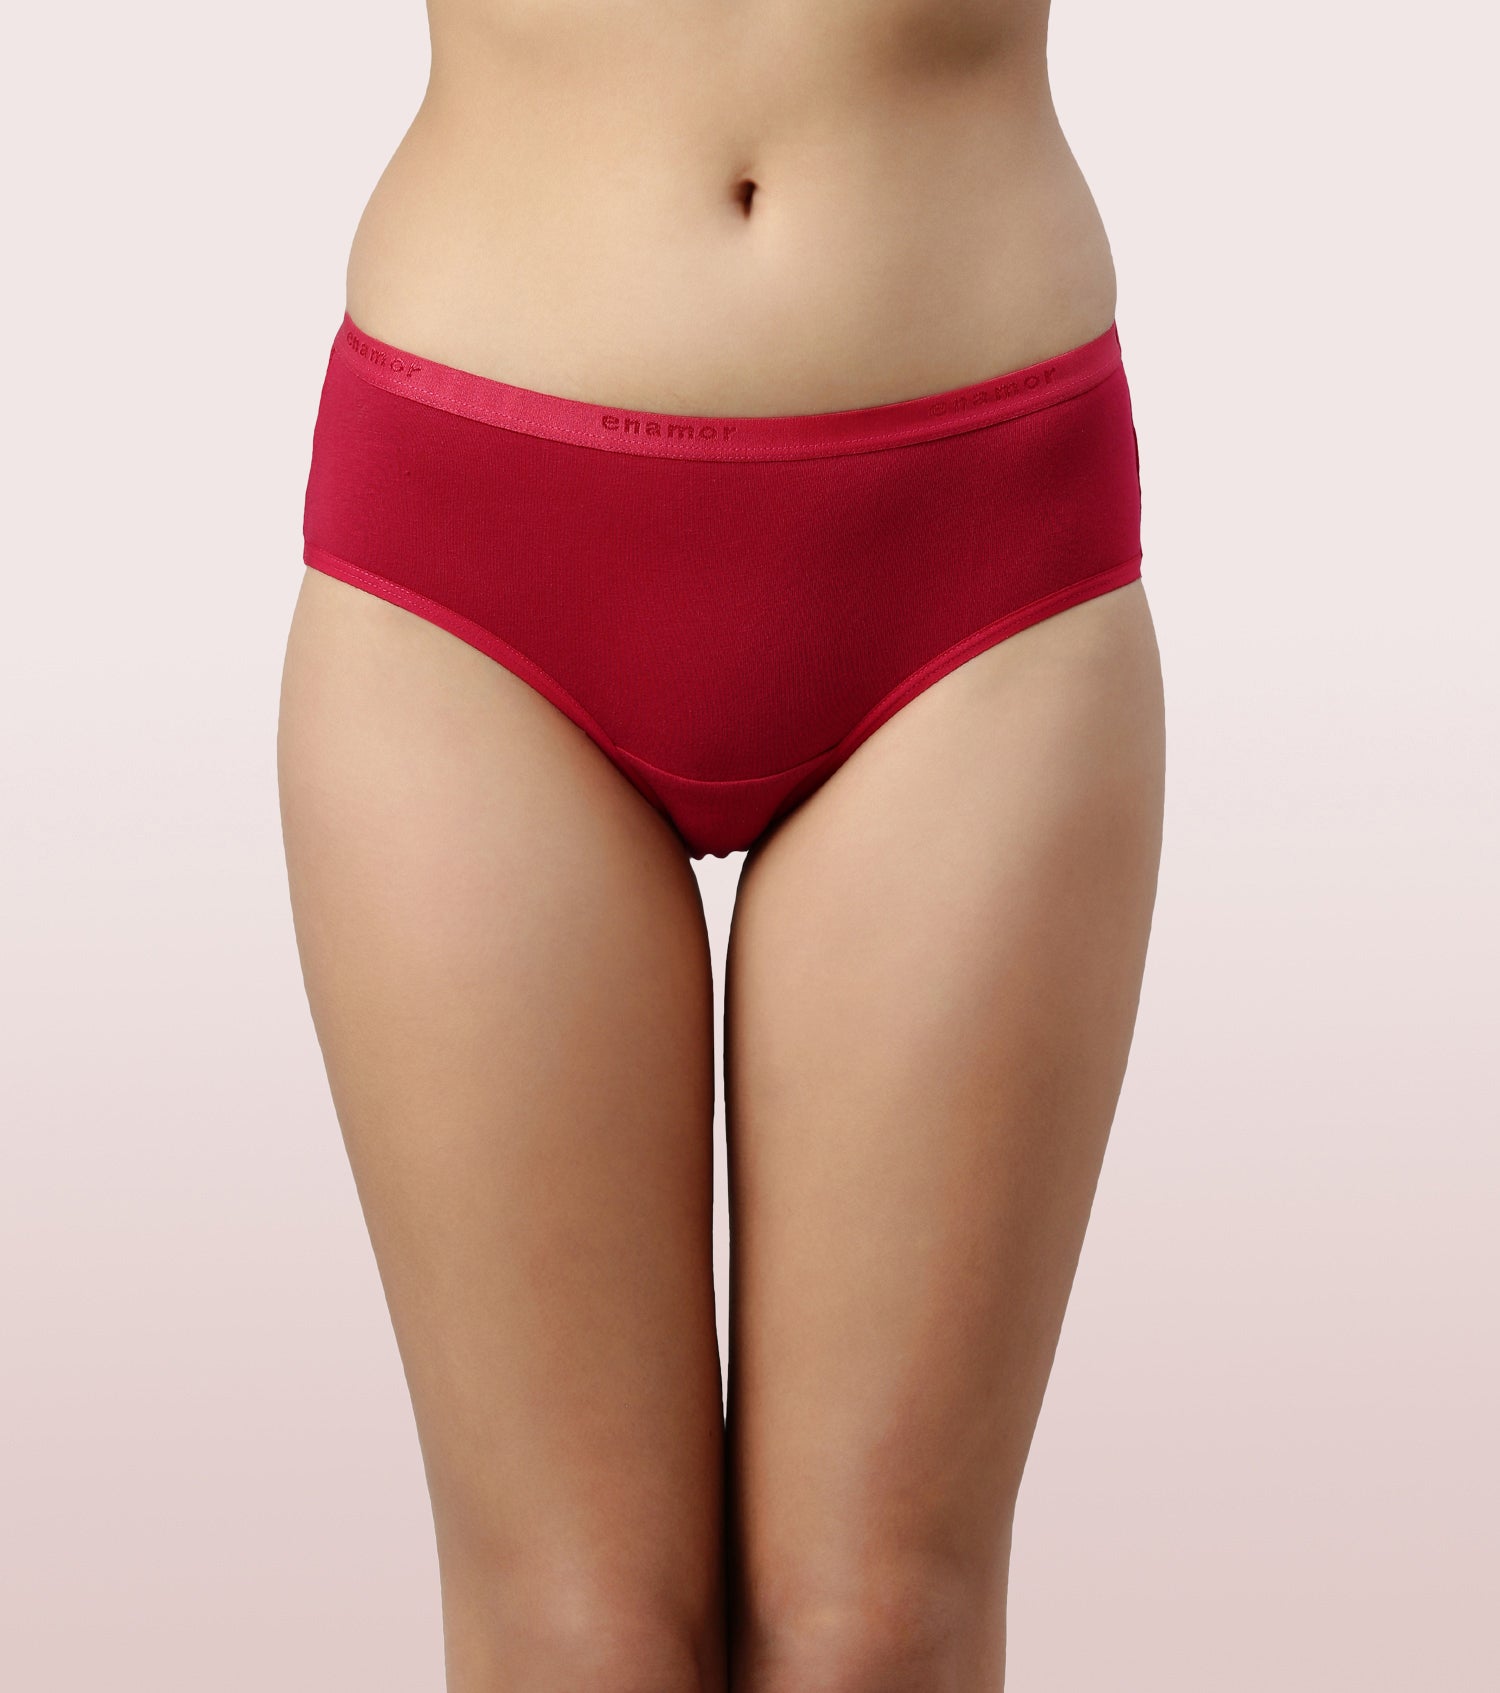 Hipster Panty | Full Coverage & Mid Waist -Assorted-Pack Of 5-Colors And Print May Vary